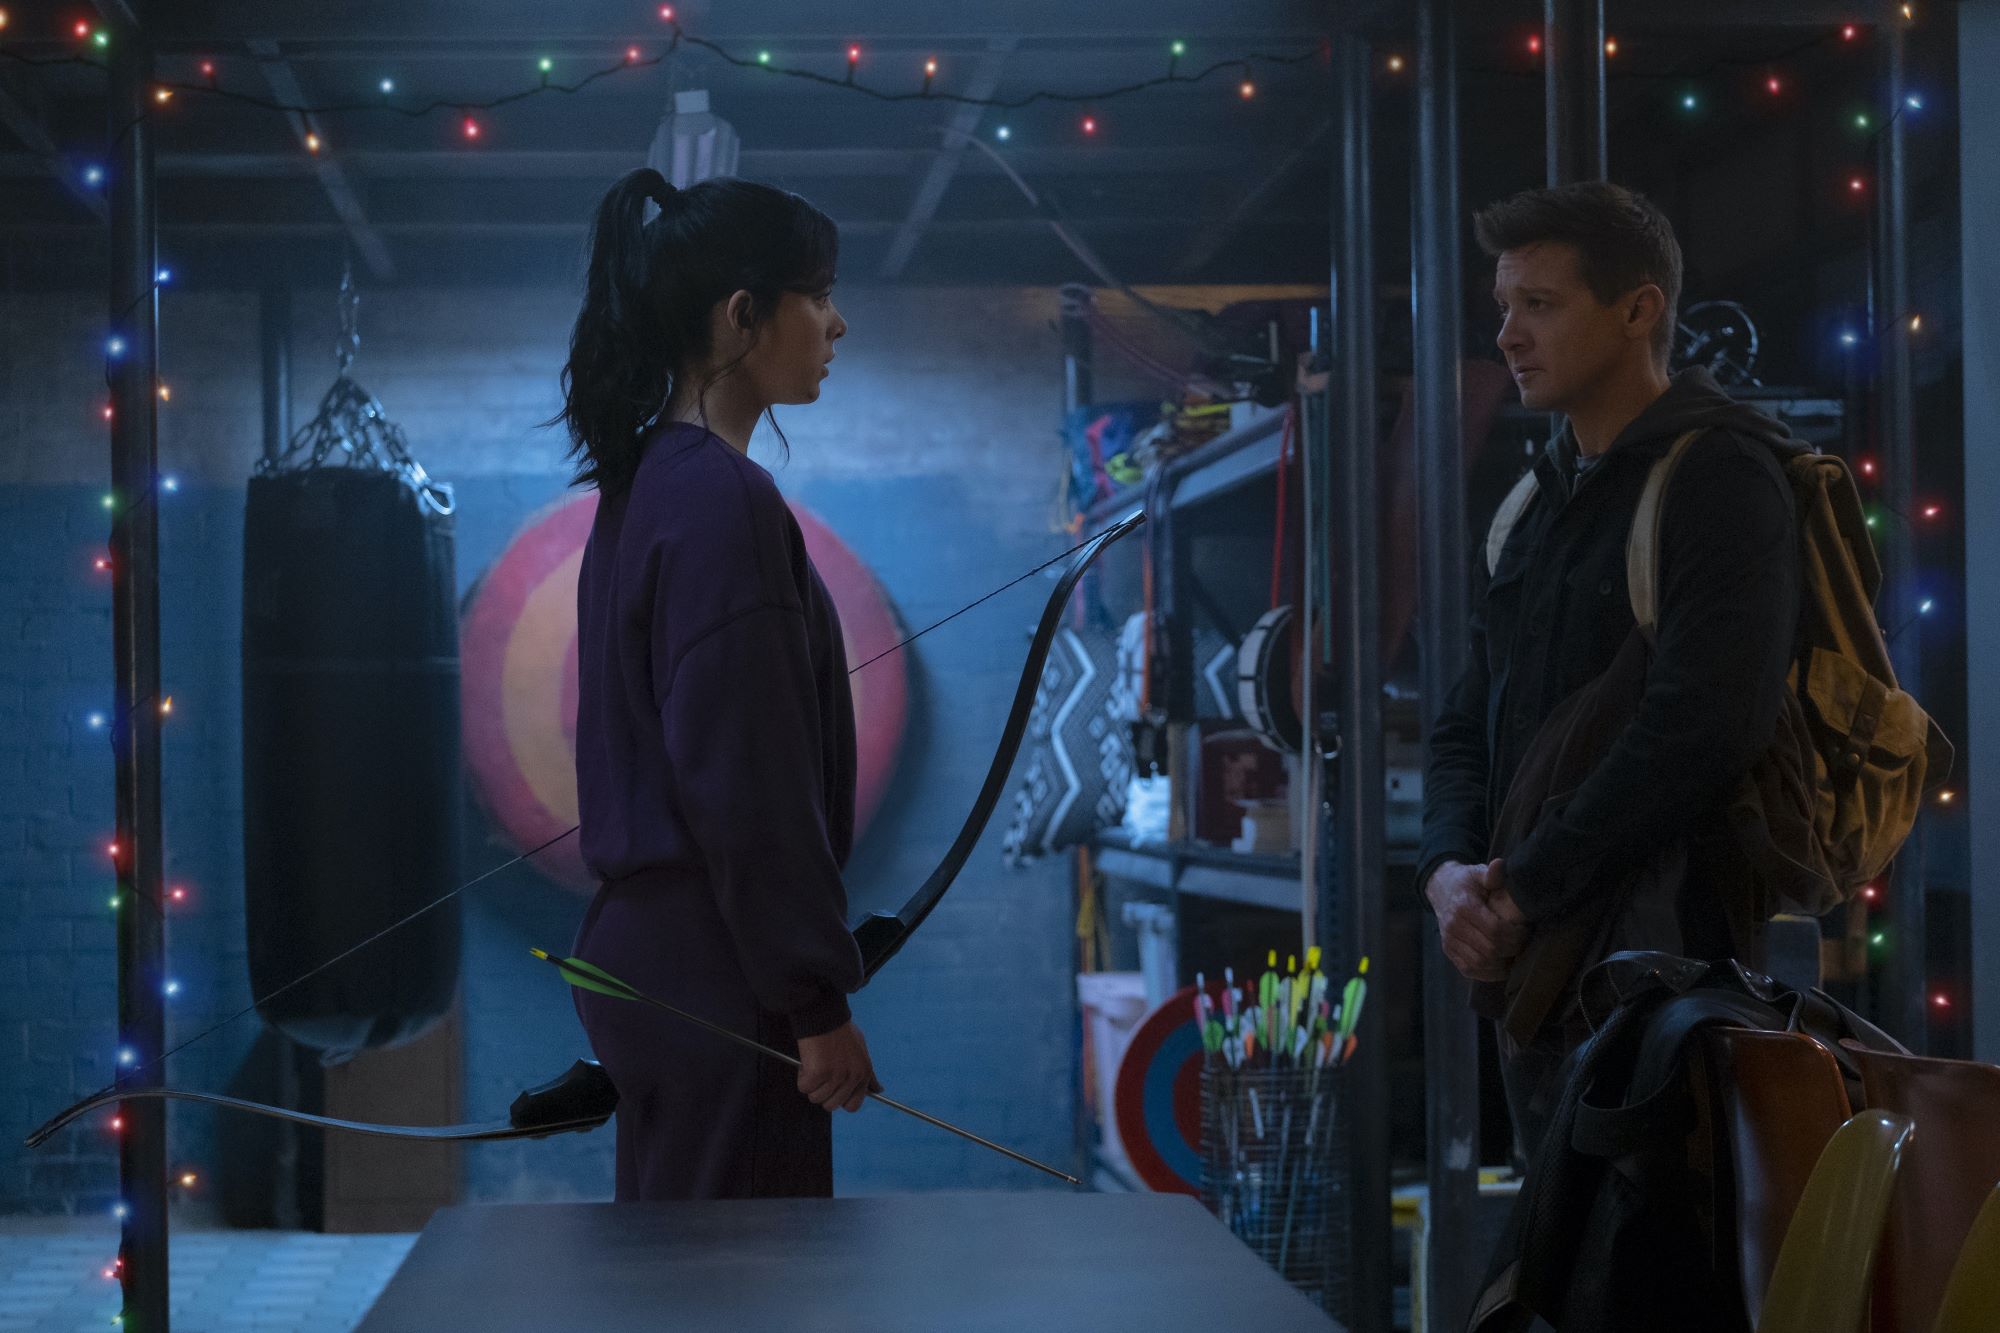 'Hawkeye' actors Hailee Steinfeld and Jeremy Renner, in character as Kate Bishop and Clint Barton, stand in a makeshift targeting practice room. Kate wears a purple sweater and purple sweatpants, and she holds a bow and arrow. Clint wears a dark jacket over a green hoodie and has a tan backpack slung over his back. The actors star in a new 'Hawkeye' clip.